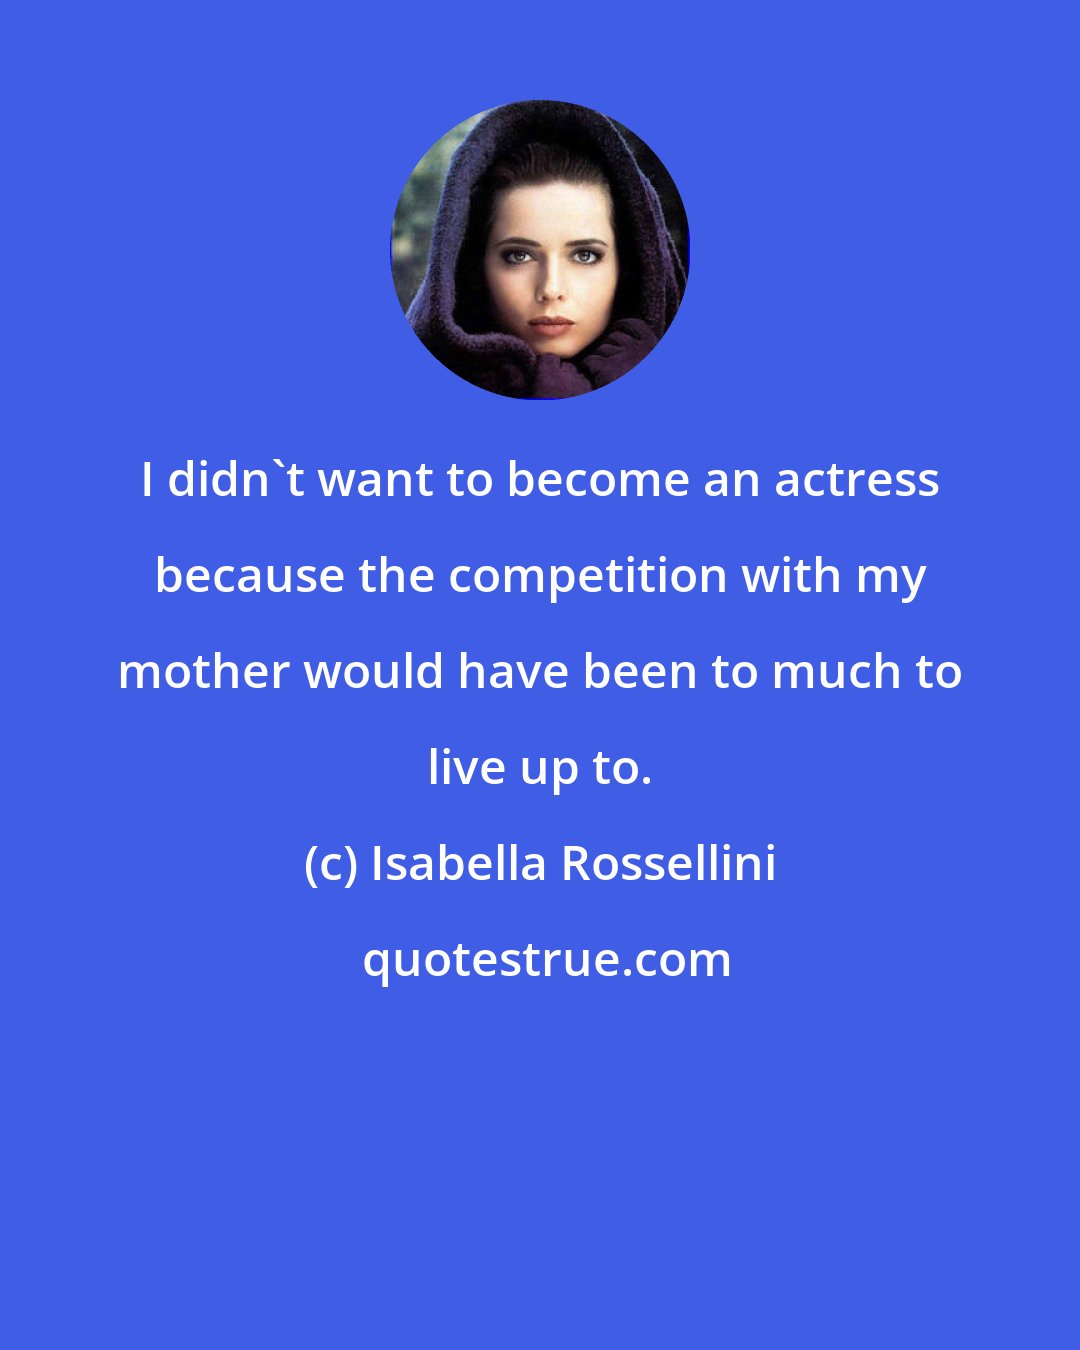 Isabella Rossellini: I didn't want to become an actress because the competition with my mother would have been to much to live up to.